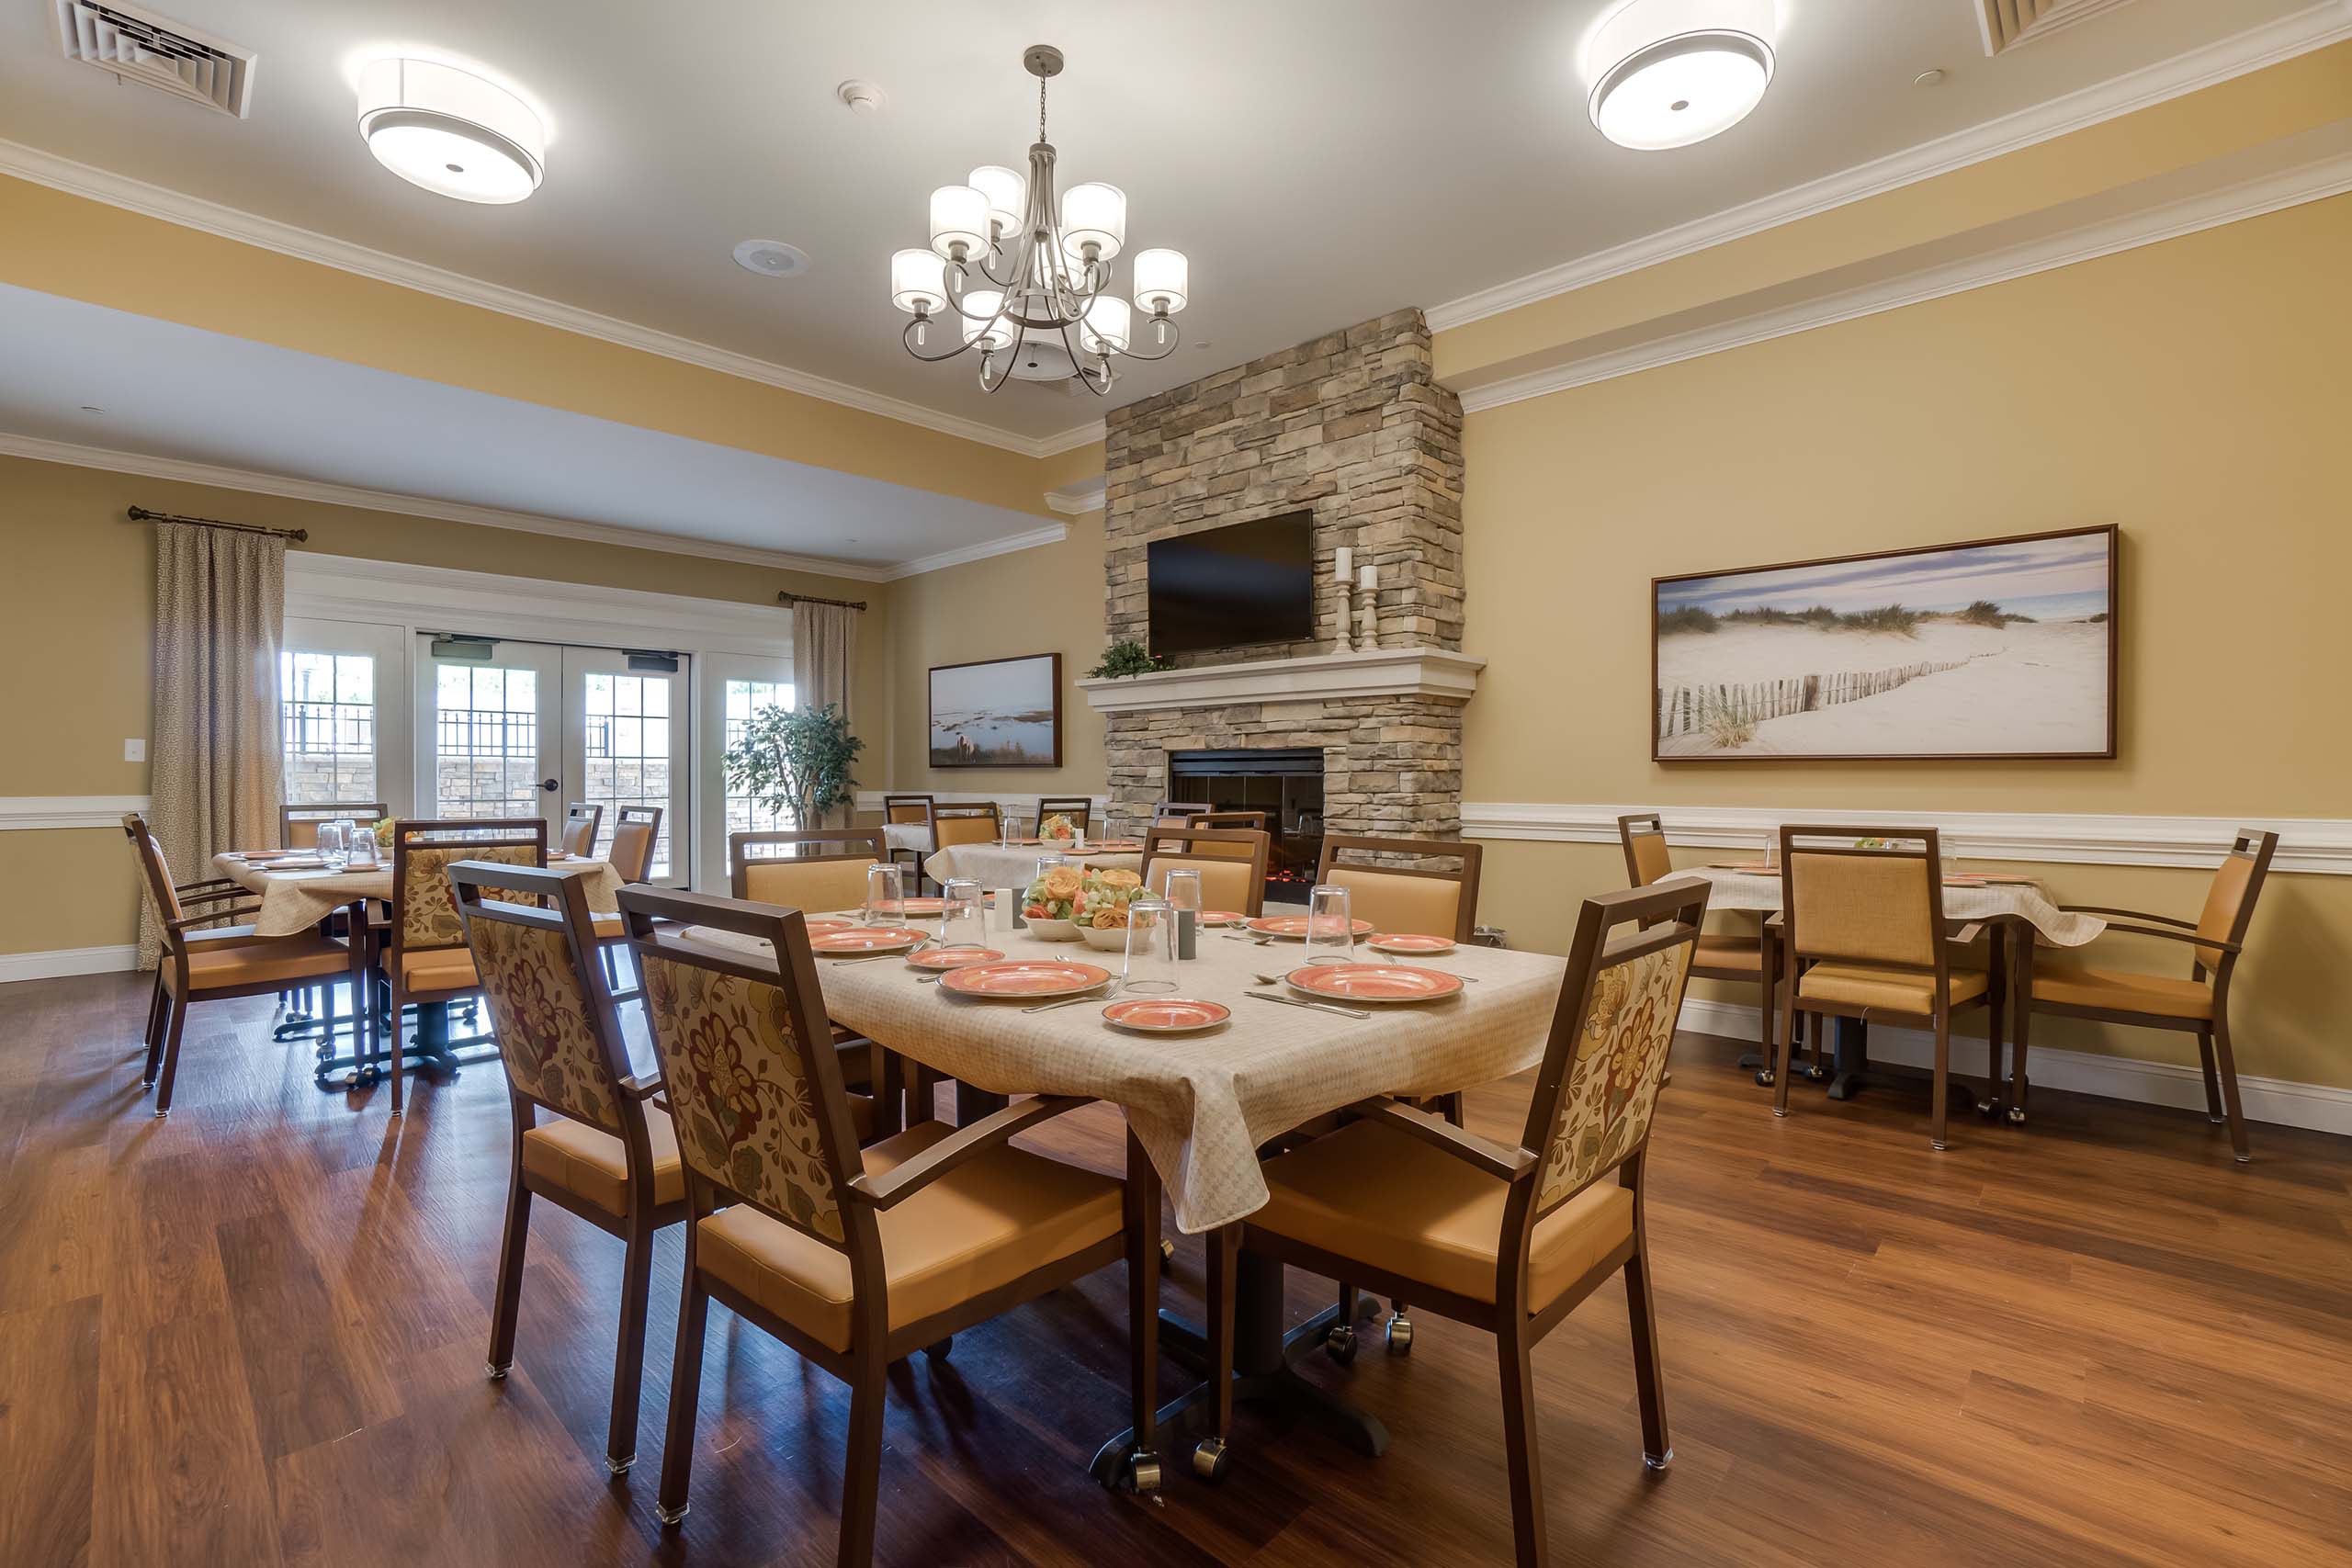 The Memory Care Dining Room